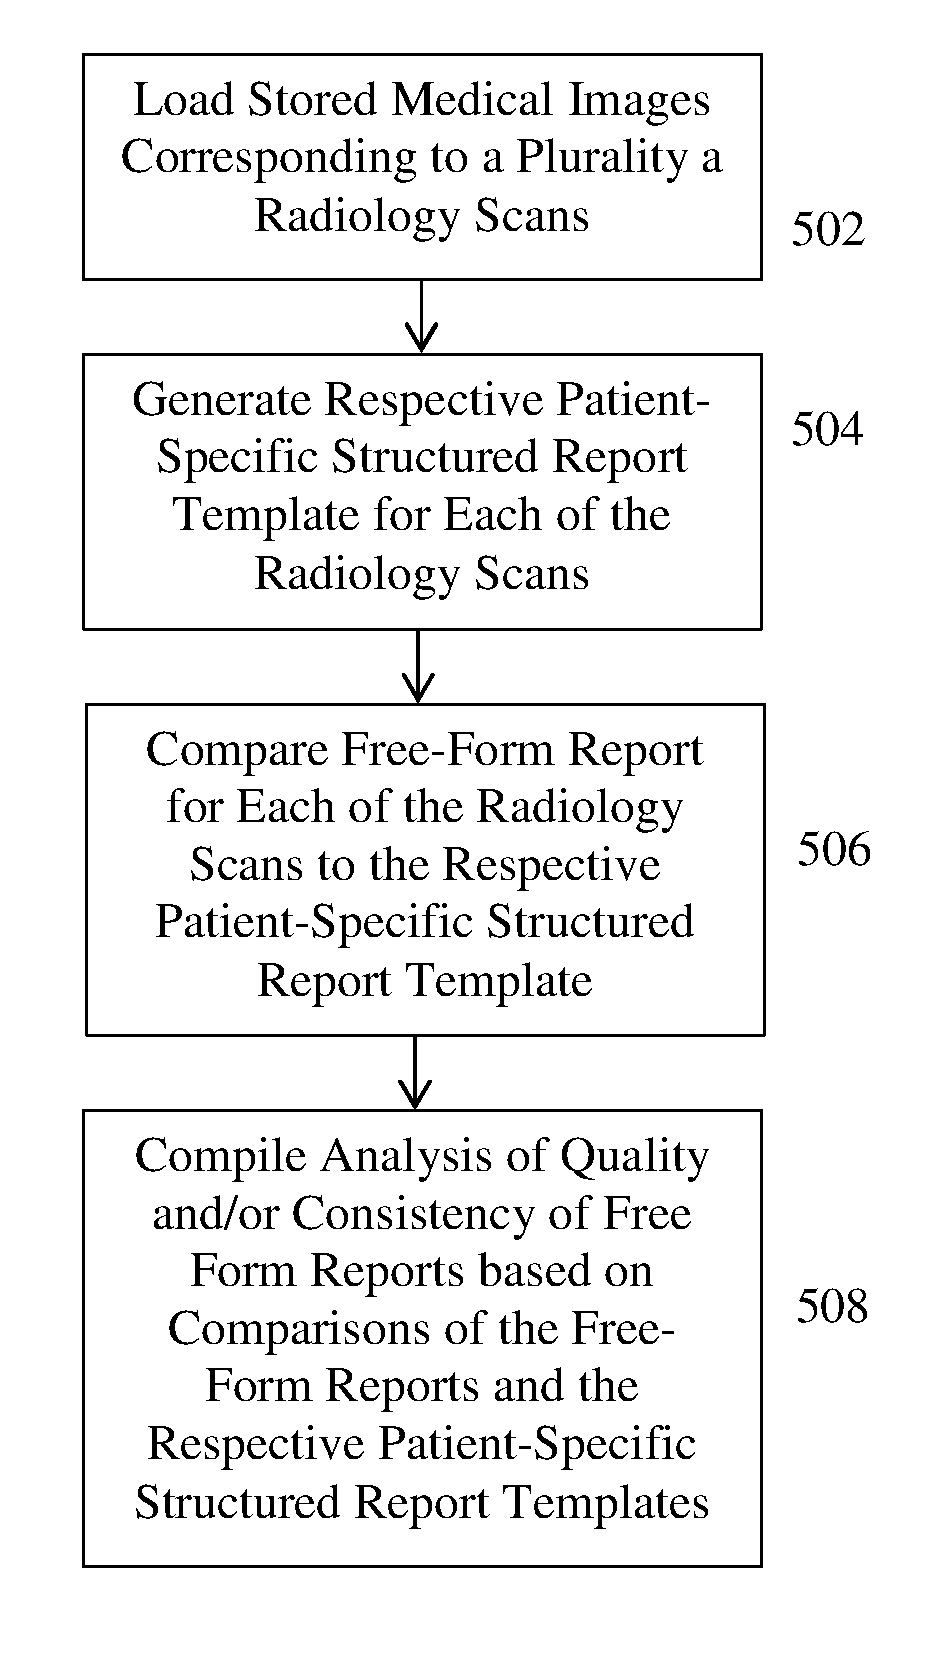 Method and System for Radiology Structured Report Creation Based on Patient-Specific Image-Derived Information